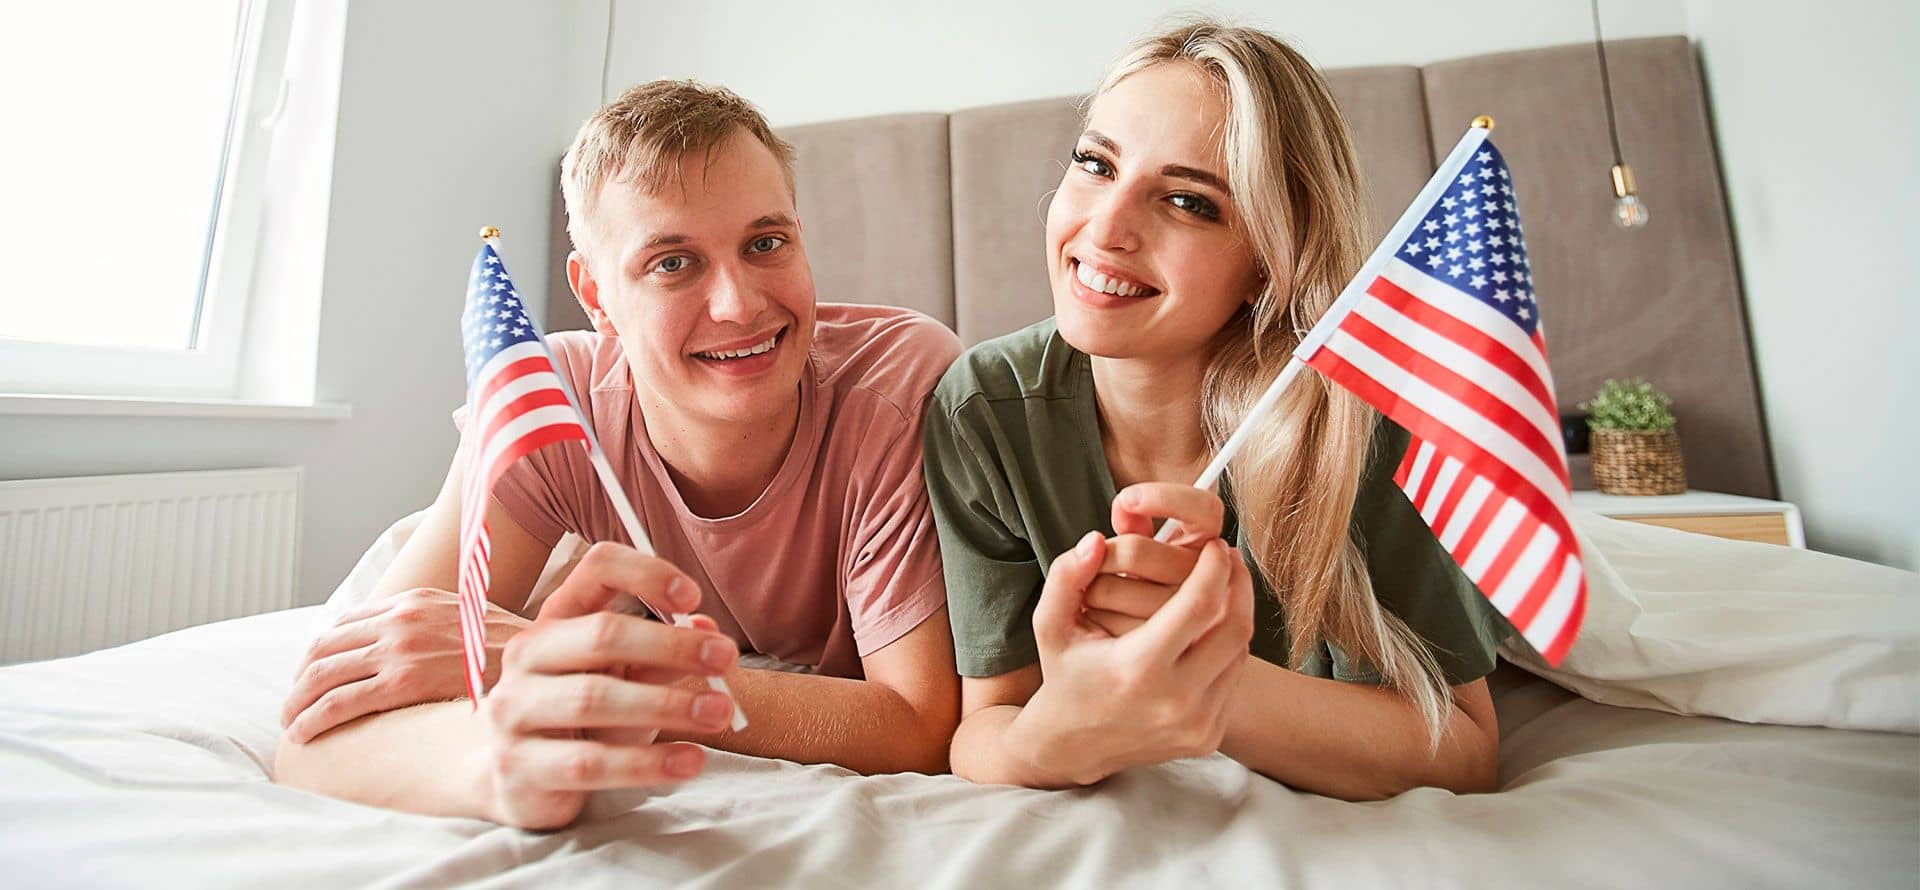 Man and woman celebrate the 4th of July on a new mattress.